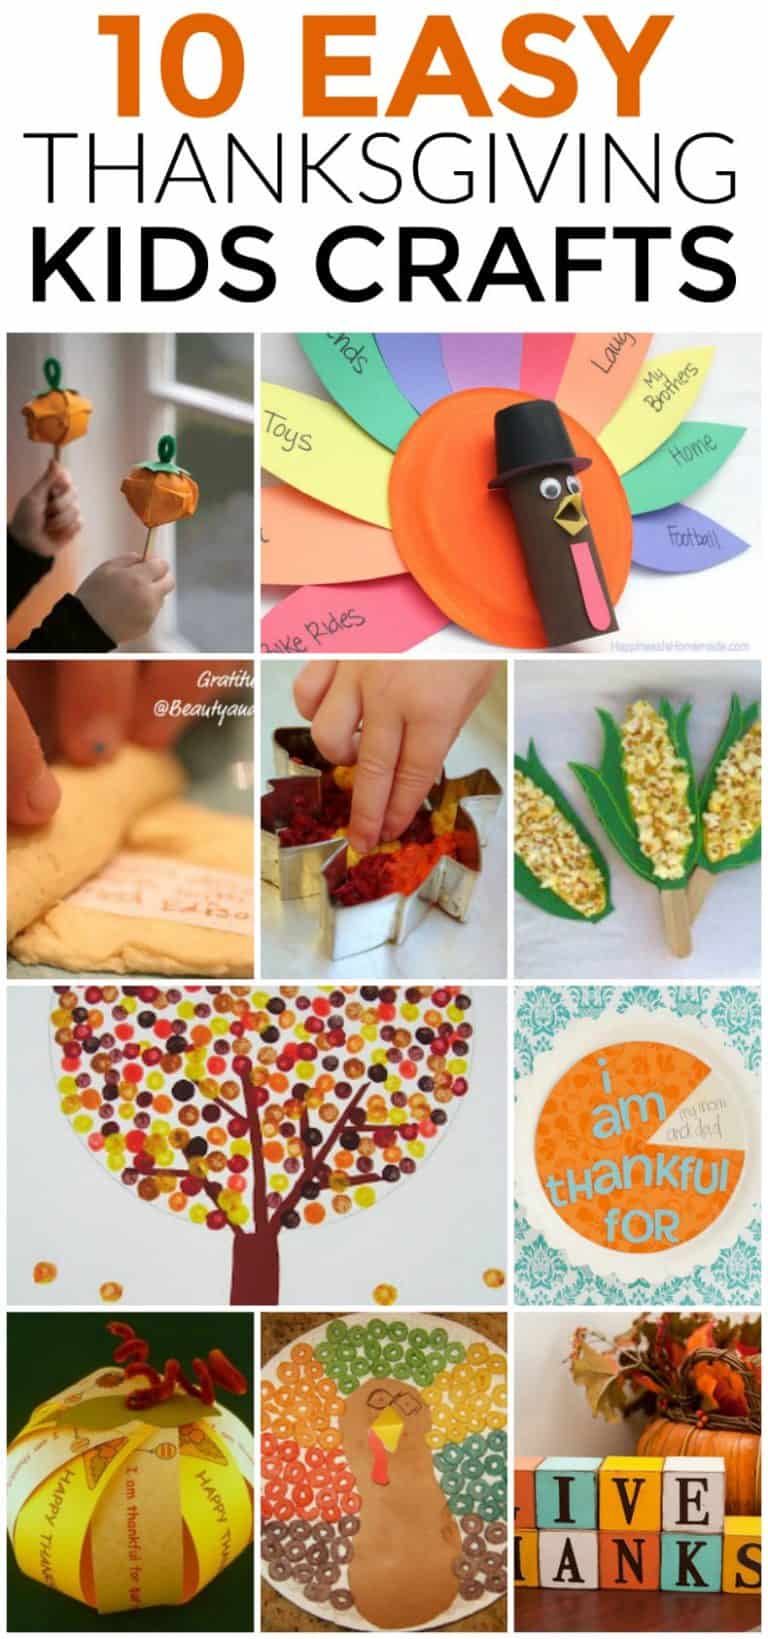 How To Keep Your Thanksgiving Sanity: 10 Easy Kids Crafts